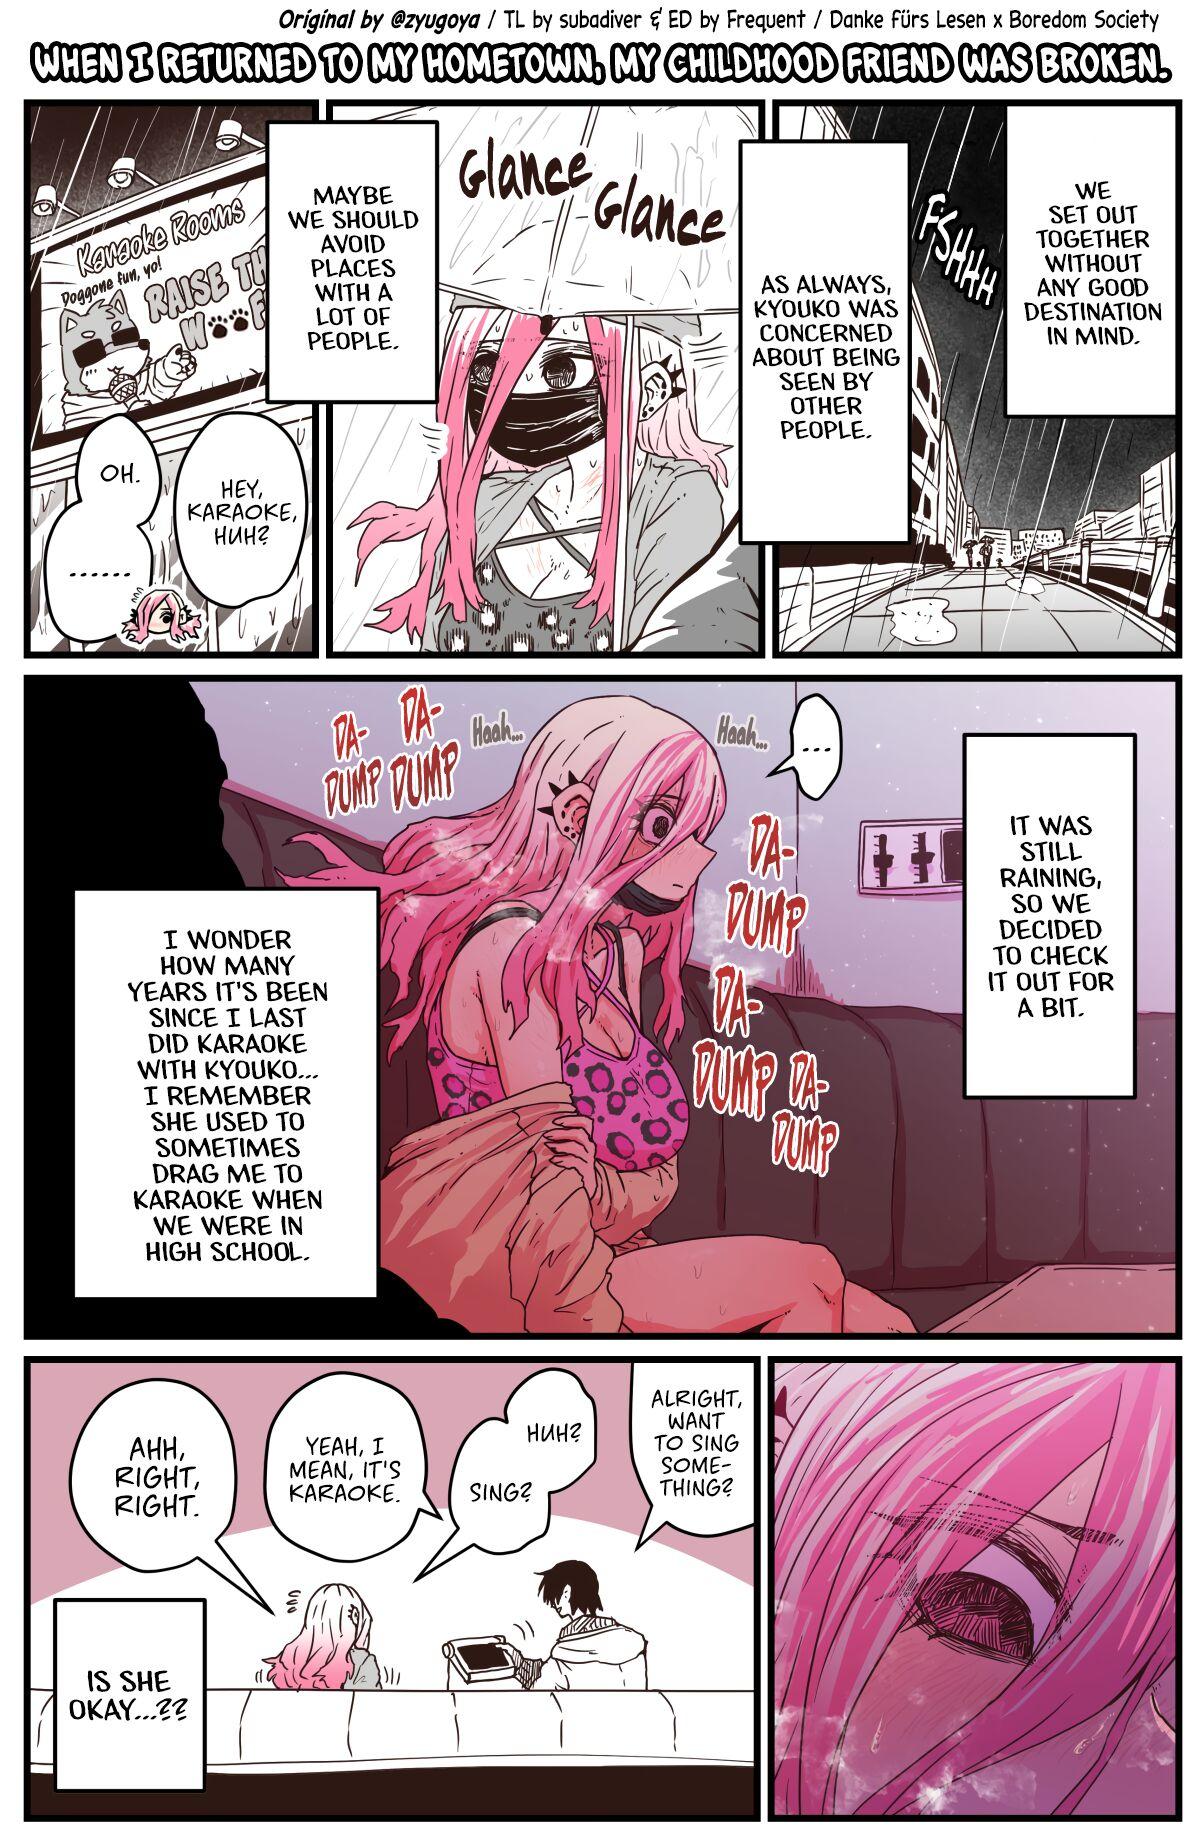 Taboo When I Returned to My Hometown, My Childhood Friend was Broken - Original Tites - Page 6